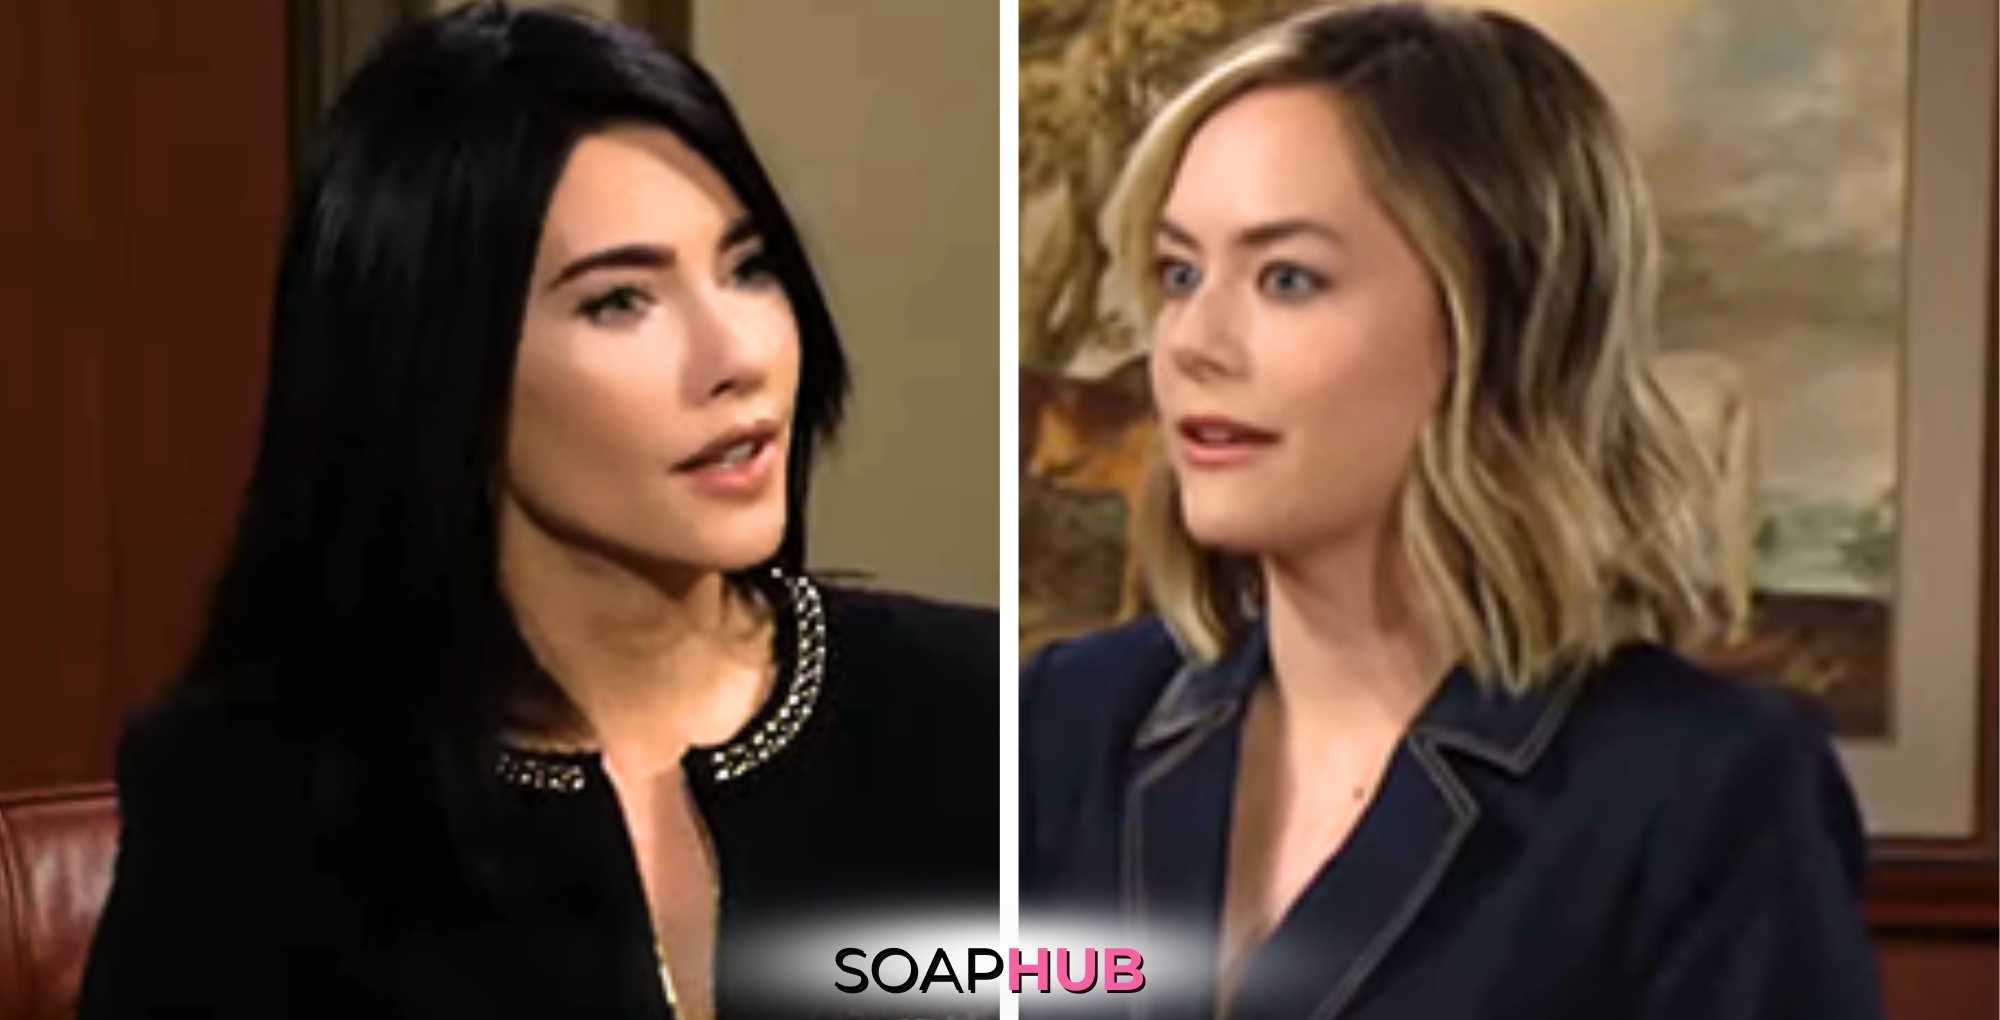 Bold and the Beautiful Spoilers for Friday, March 29 Episode 9239 Feature Steffy and Hope with the Soap Hub Logo Across the Bottom.